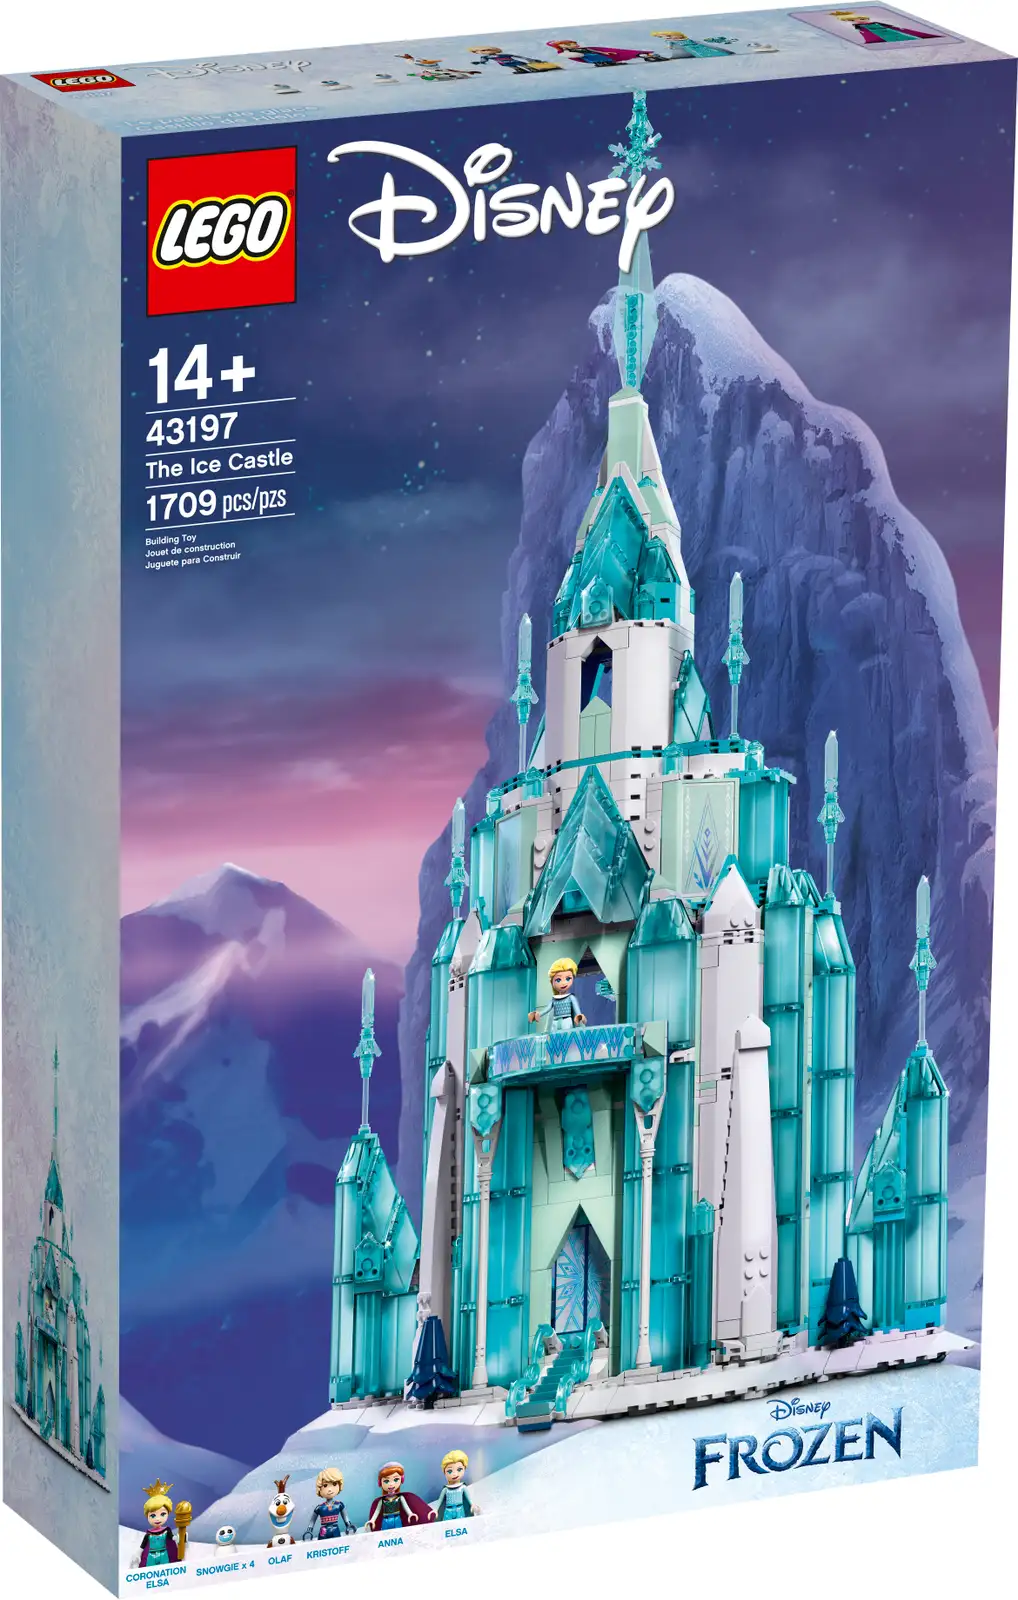 Older kids and adults alike will love building this incredible LEGO® ǀ Disney The Ice Castle (43197) toy set, featuring a challenging build full of details linking to the movies, a smaller Arendelle castle build, plus printed building instructions and digital Instructions PLUS. A unique Frozen building experience Fans of the movies will instantly recognize the castle with the curved, double-sided staircase that leads up to the throne room, the glistening ice fountain, the balcony and much more. Builders can spend hours discovering everything as they assemble and play with the castle, or set it up for display. Remarkable model Standing impressively tall, this challenging model will engage fans for hours, with Disney’s Anna, 2 versions of Elsa in her coronation look as well as her iconic outfit, Kristoff and Olaf, plus 4 LEGO Snowgie figures. At over 1,700 pieces, this set will make a meaningful holiday gift that appeals to Disney Frozen fans young and old. Inspire amazement with this outstanding LEGO® ǀ Disney The Ice Castle (43197) set, a great treat to spark fond memories of the beloved movies for up-in-age fans of Disney’s Frozen. Create an impressive model of the iconic castle, complete with grand staircase, great hall and ice fountain, plus 9 characters, including 4 mini-doll figures and an Olaf LEGO® figure. This amazing LEGO® ǀ Disney set is loaded with accessories, including a miniature, buildable model of Arendelle Castle and a ship in a bottle. Great for reliving movie scenes or open-ended play. Any Disney’s Frozen fan aged 14 and up will love this unique and challenging, buildable model. The castle, with over 1,700 pieces, is full of clever details and makes an incredible gift for anyone. With the castle measuring over 25.5 in. (65 cm) high, 13.5 in. (35 cm) wide and 7.5 in. (19 cm) deep, this set is beautiful on display and perfect for encouraging imaginative role-play fun. Want to give builders an awesome building experience? Now you can with digital Instructions PLUS! With intuitive modes like zoom, rotate and ghost mode, it’s LEGO® building for the digital age! Give older kids great characters and more challenging builds with LEGO® ǀ Disney sets. This singular building toy offers story starters that helps boost builders’ creativity and imagination skills. LEGO® components meet rigorous industry standards to ensure they are consistent, compatible and connect and pull apart reliably every time – it’s been that way since 1958. LEGO® components are dropped, heated, crushed, twisted and analyzed to make sure they meet strict global safety standards.